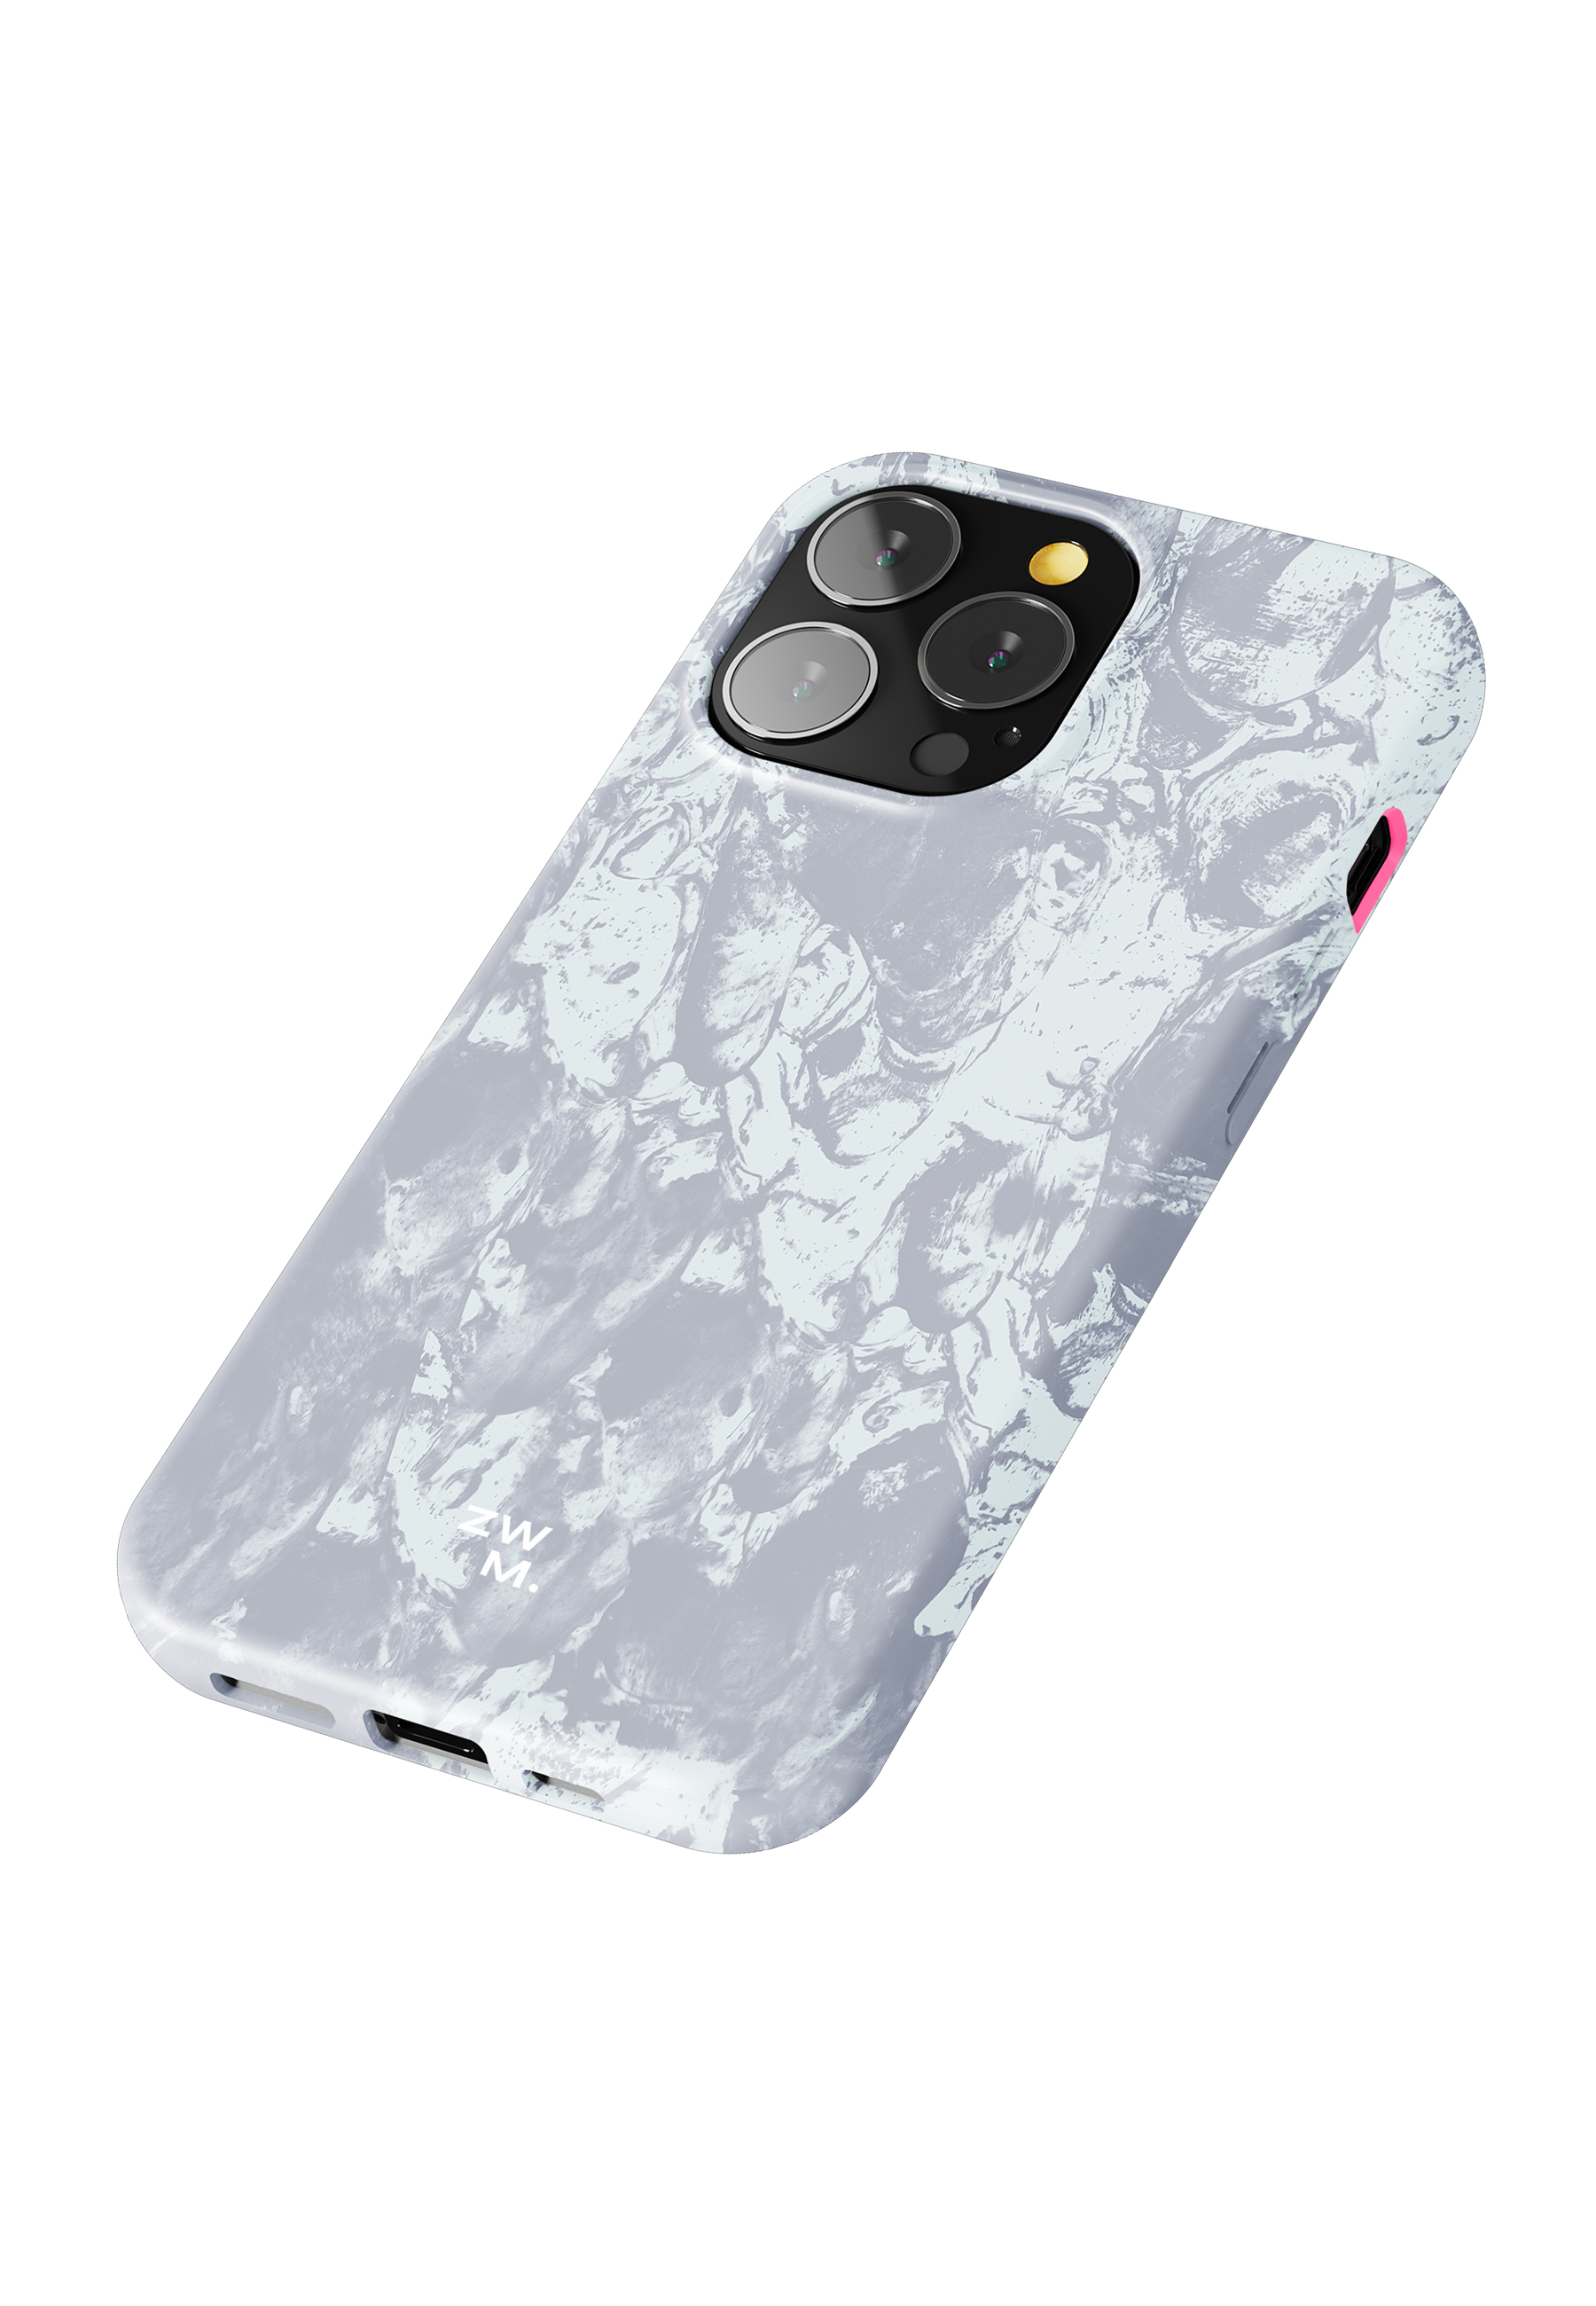 Apple, ZWM Backcover, gray/pink _13PM, 12/12 iPhone Pro,